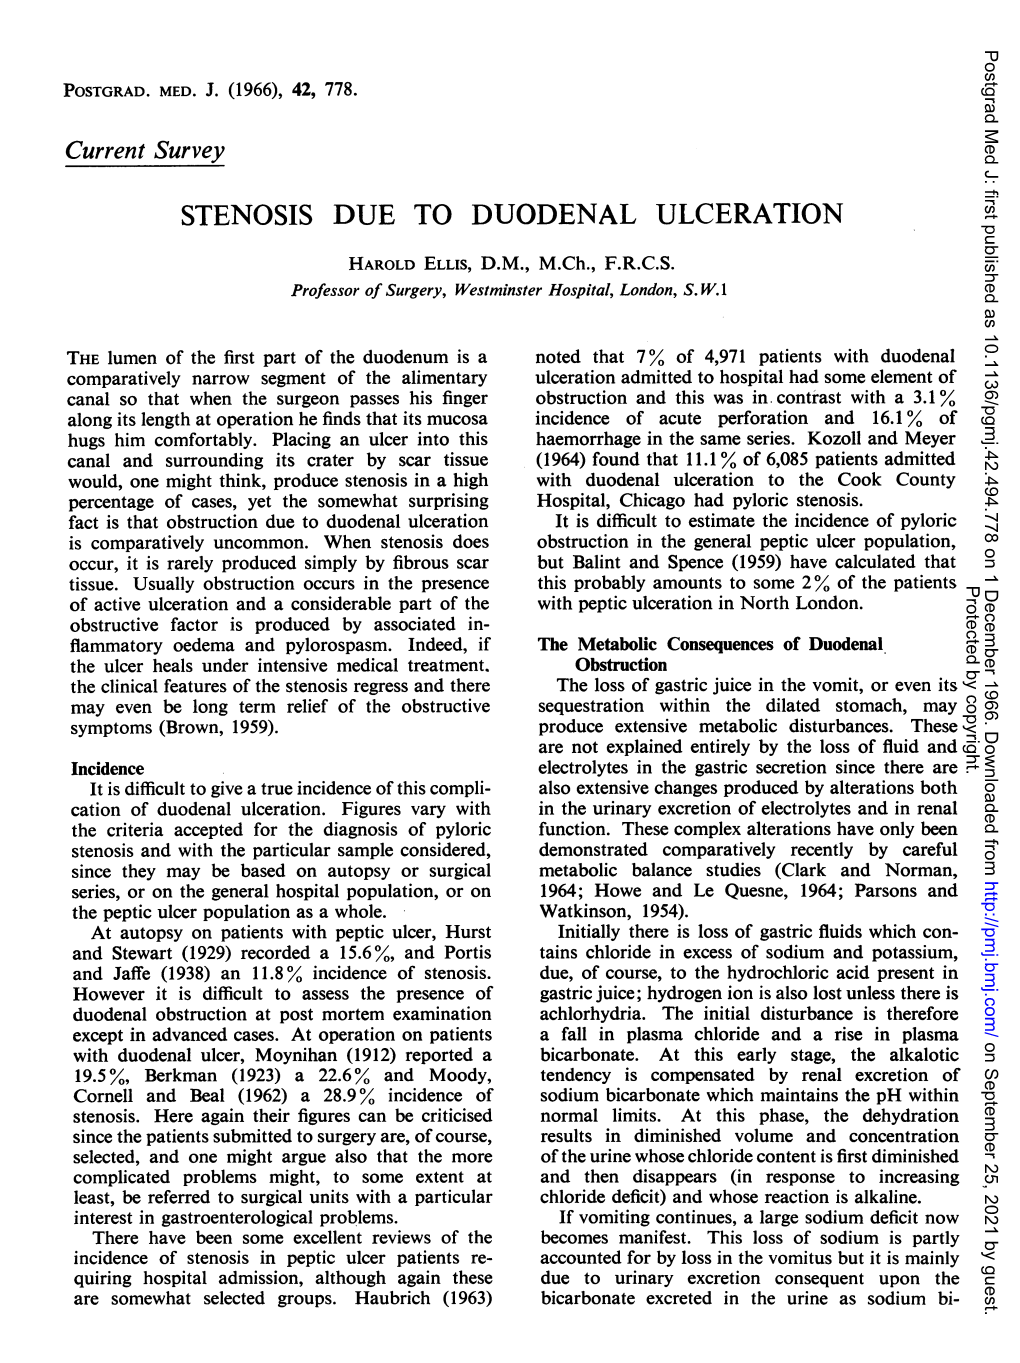 STENOSIS DUE to DUODENAL ULCERATION HAROLD ELLIS, D.M., M.Ch., F.R.C.S